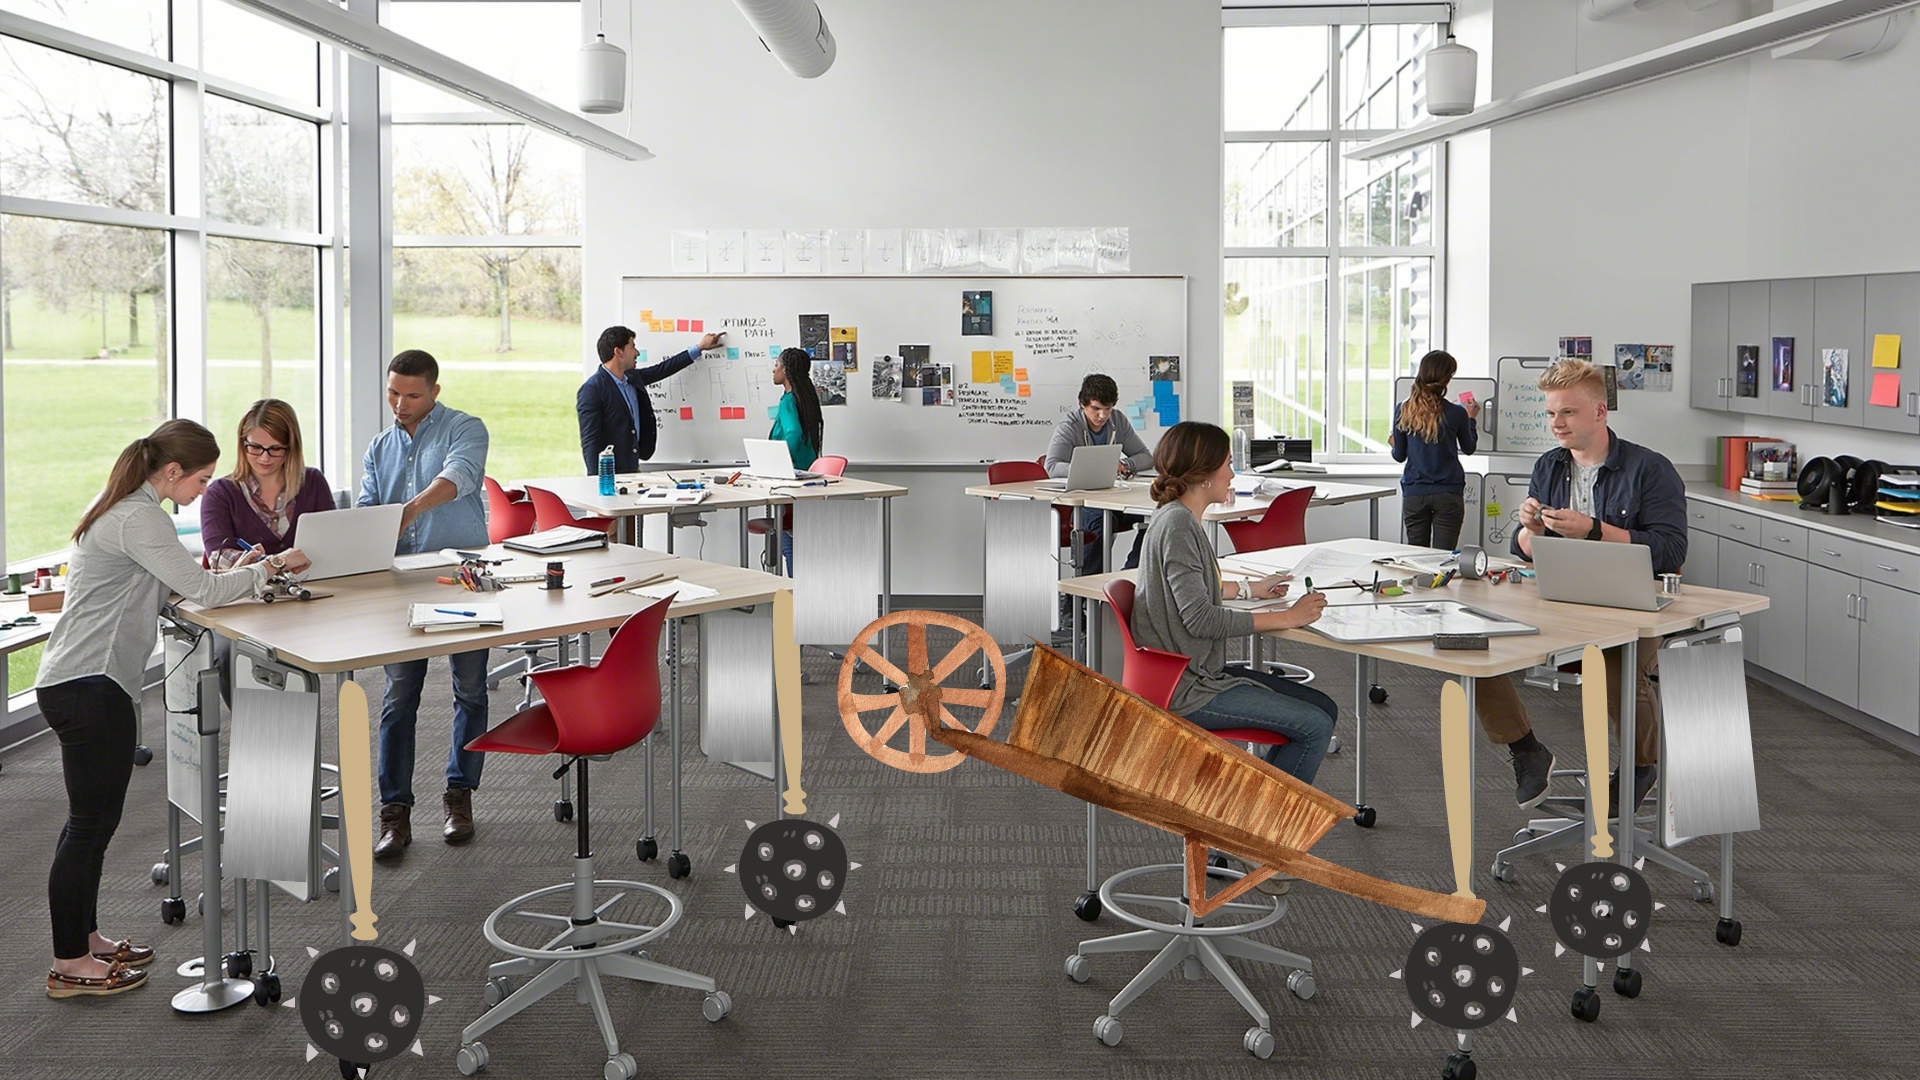 After the D615 school board voted to switch out the modern furniture to medieval furniture, wheel barrows, morning stars, and iron plates were installed.